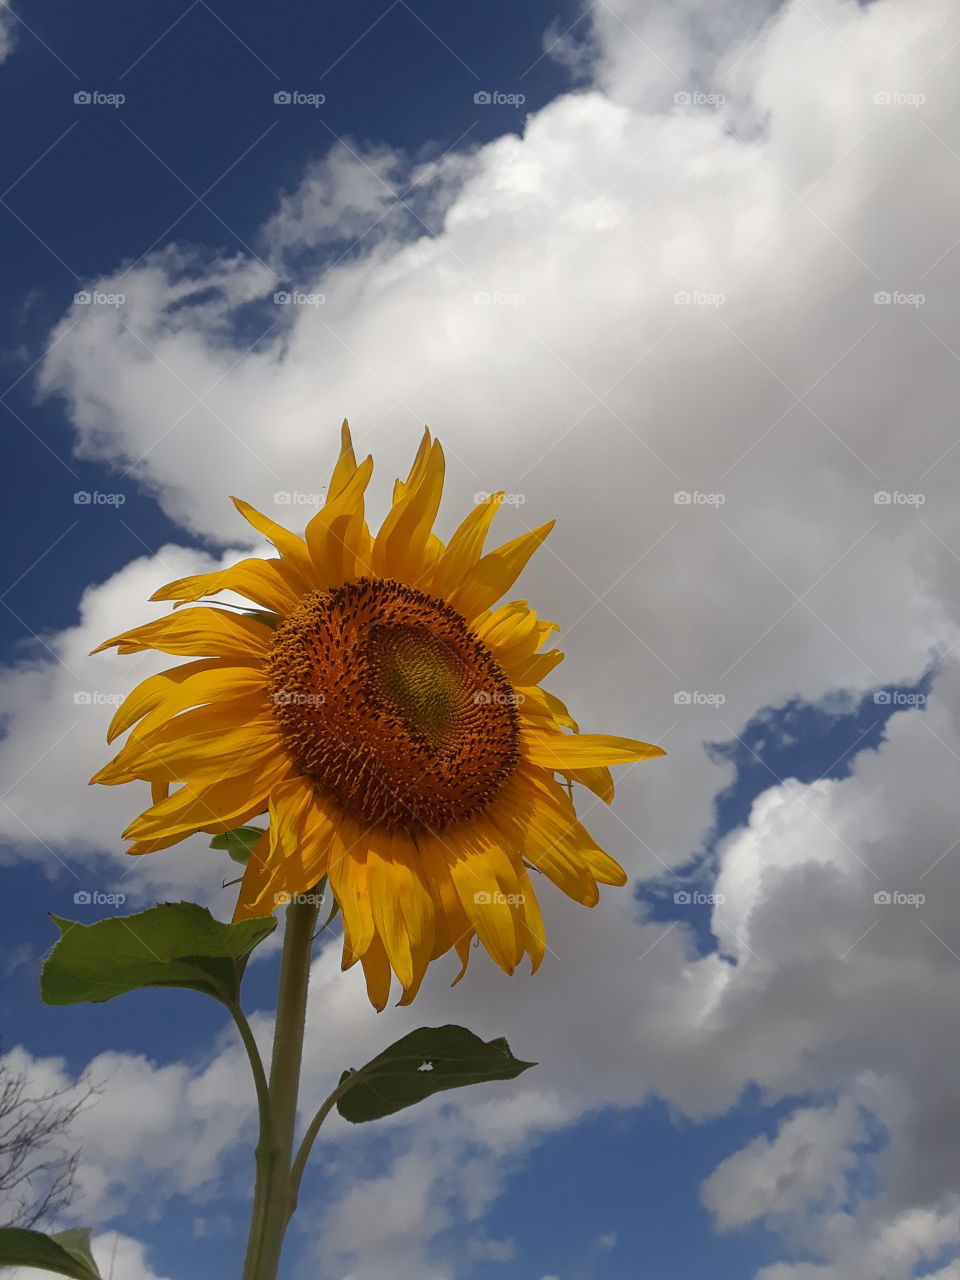 Sunflower on a Cloudy Day